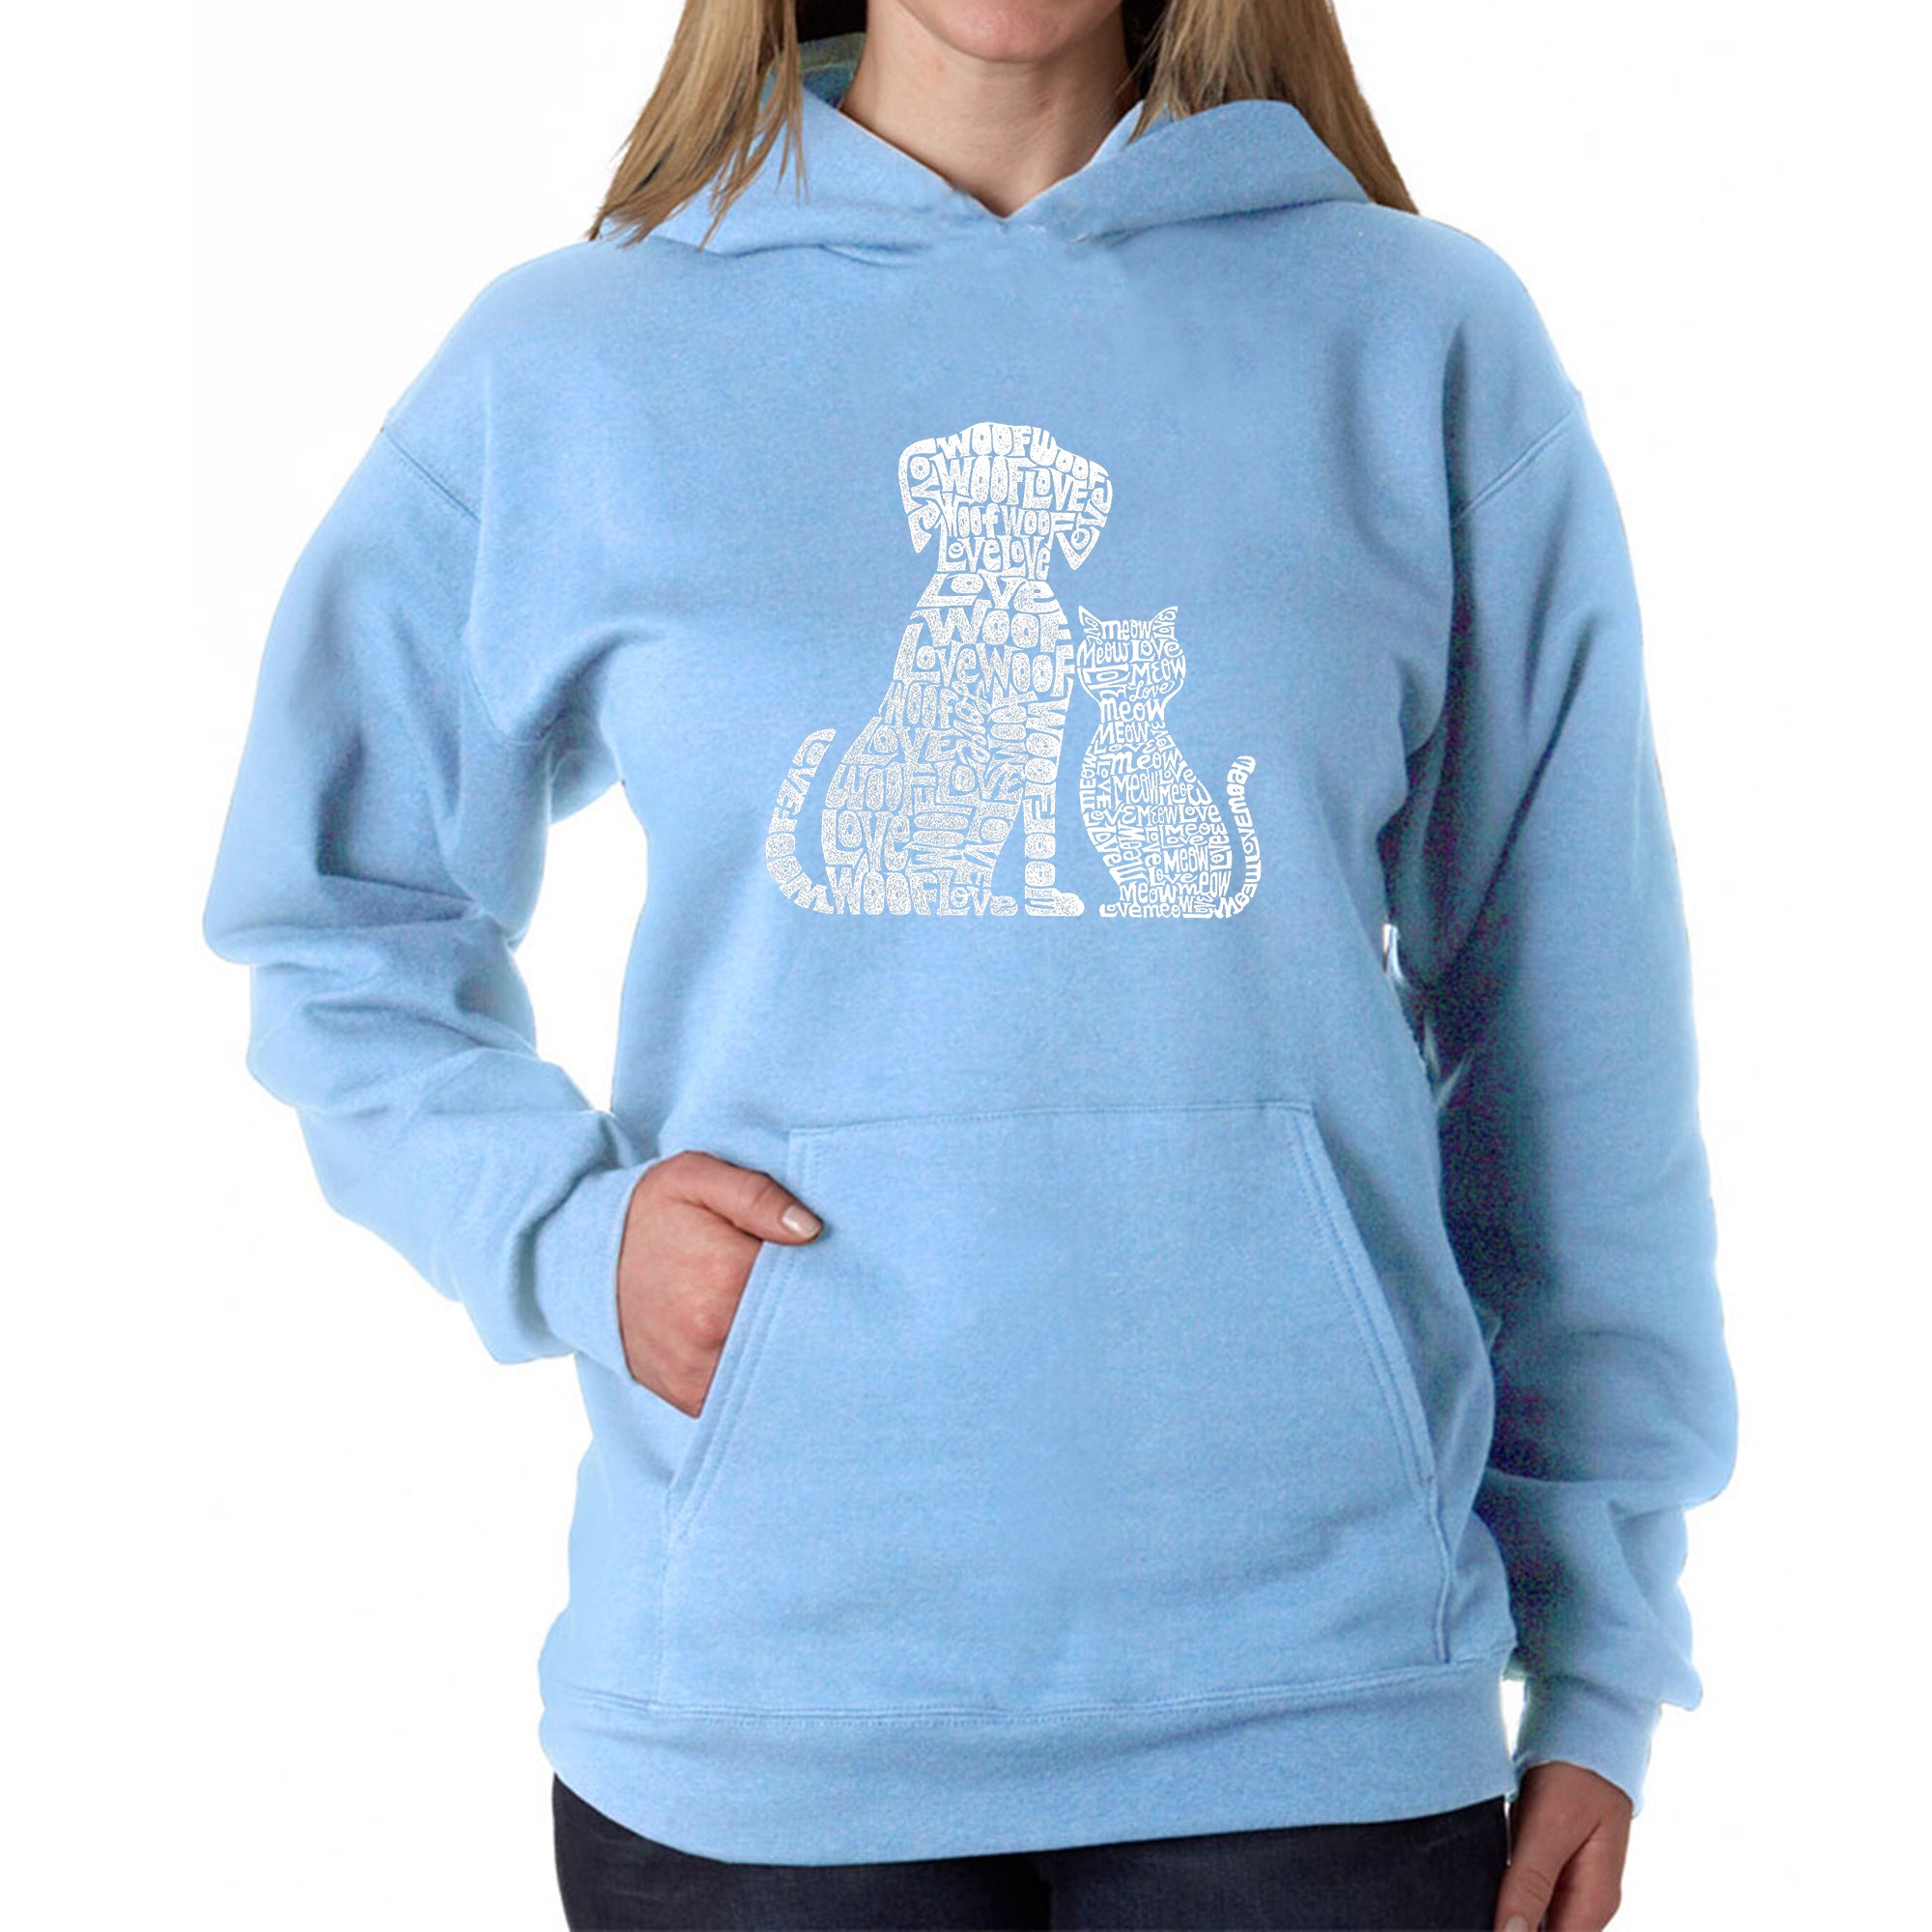 Dogs And Cats - Women's Word Art Hooded Sweatshirt - Blue - Large